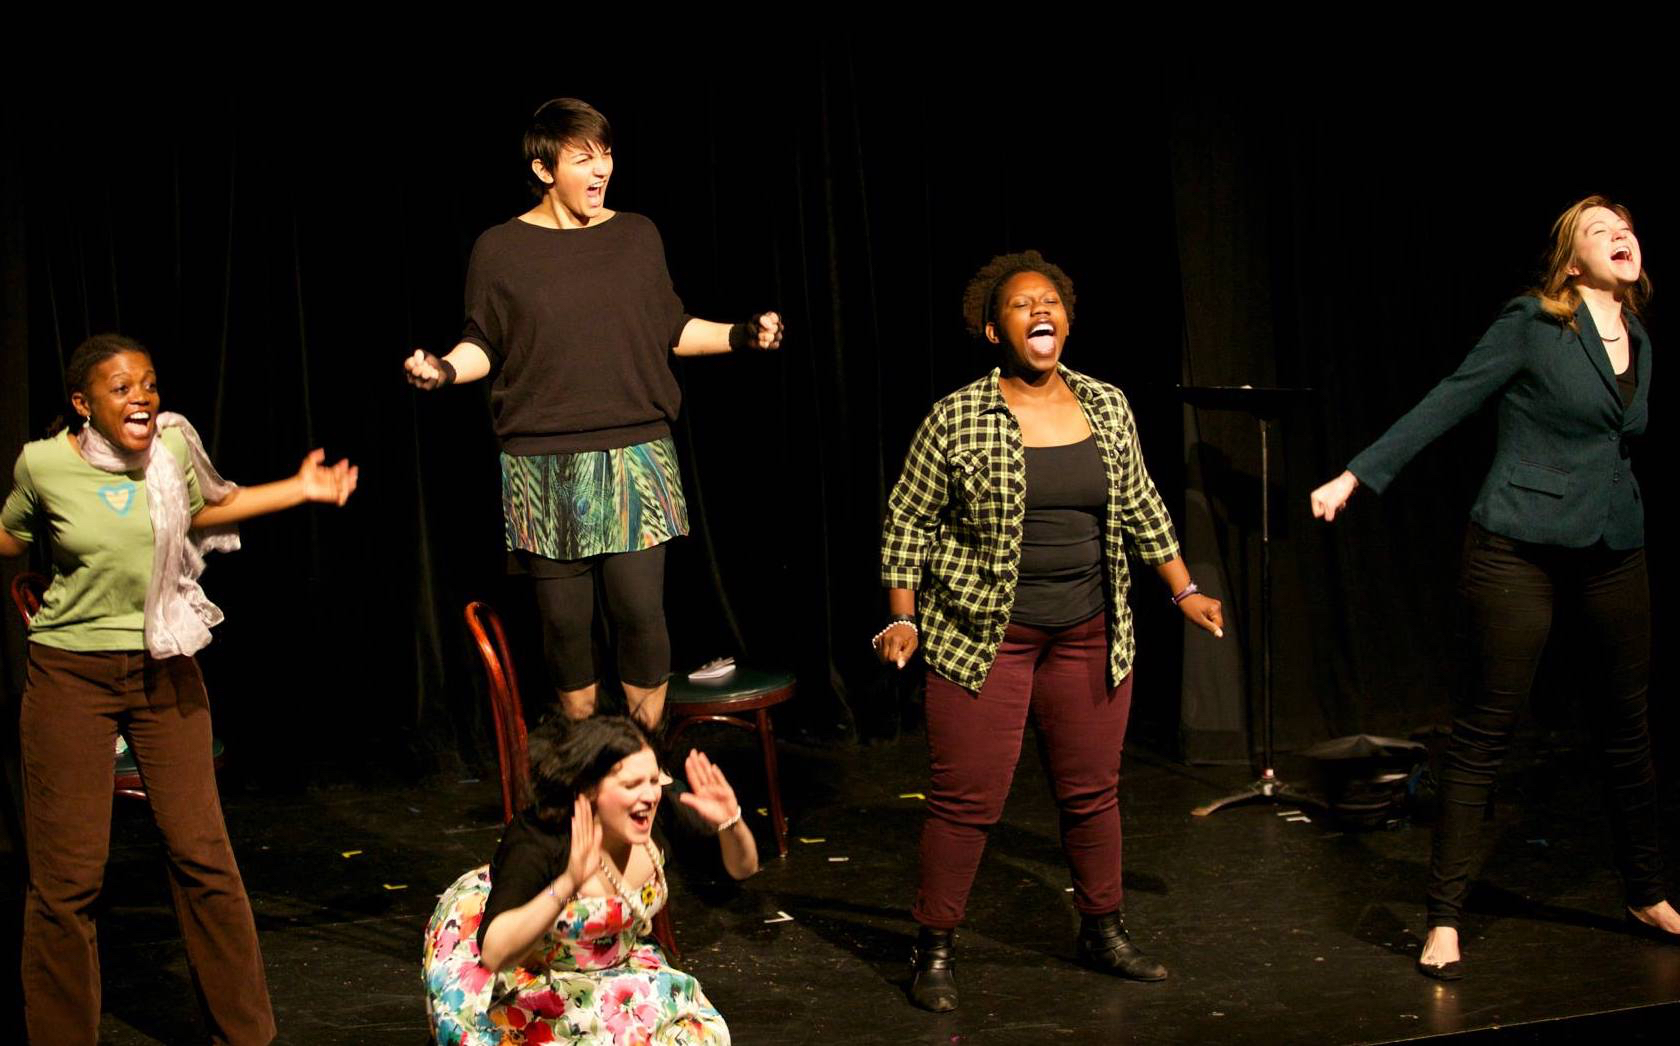 Five women on a stage enthusiastically exclaim